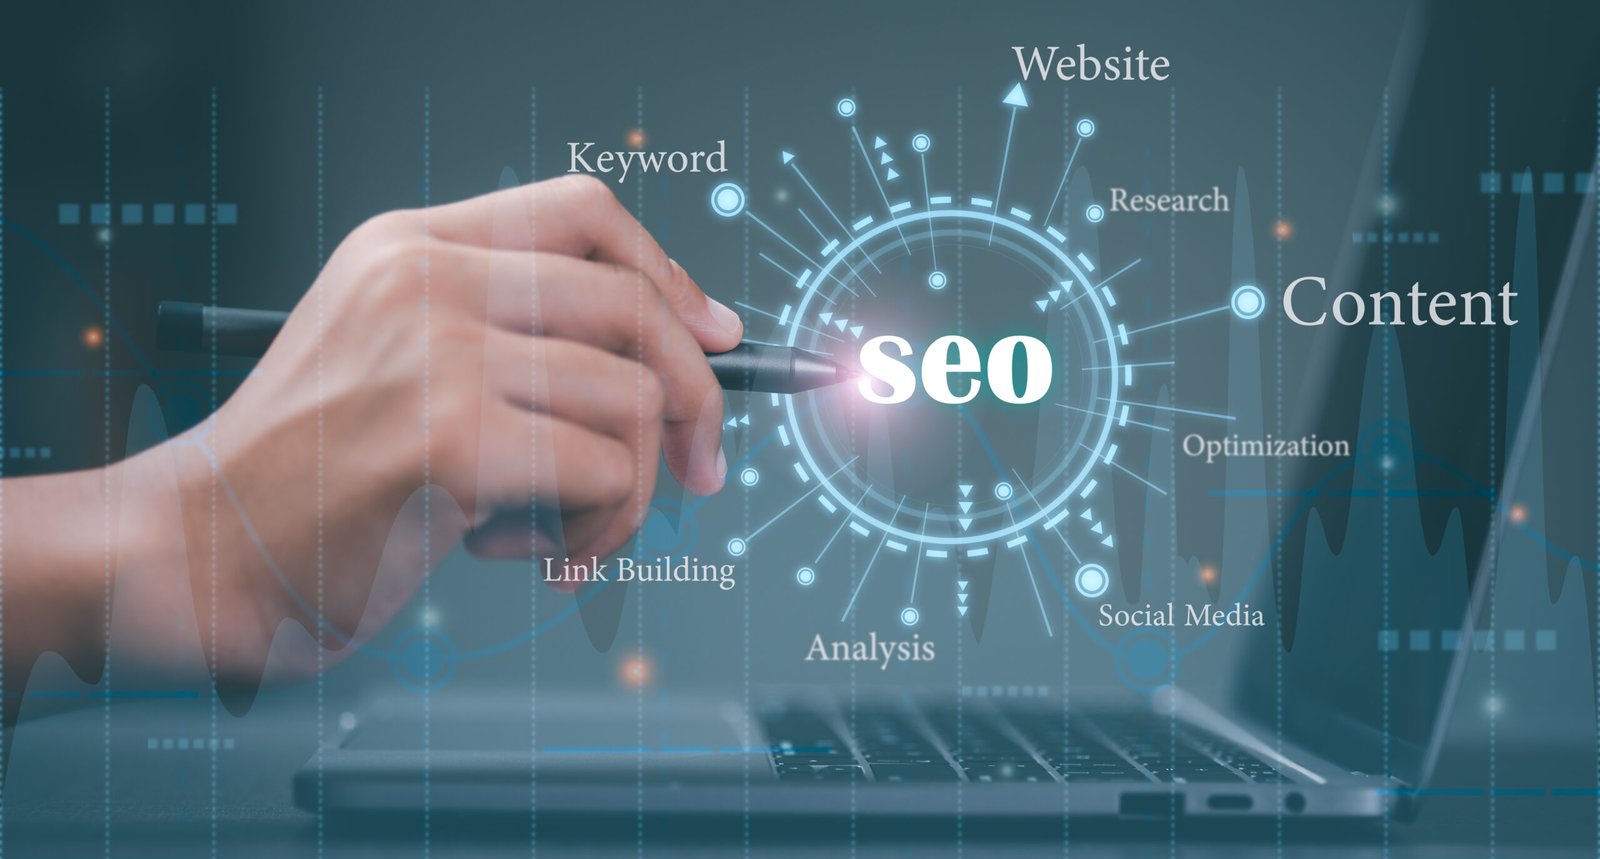 How to Set Up Search Engine Optimization for Your Website